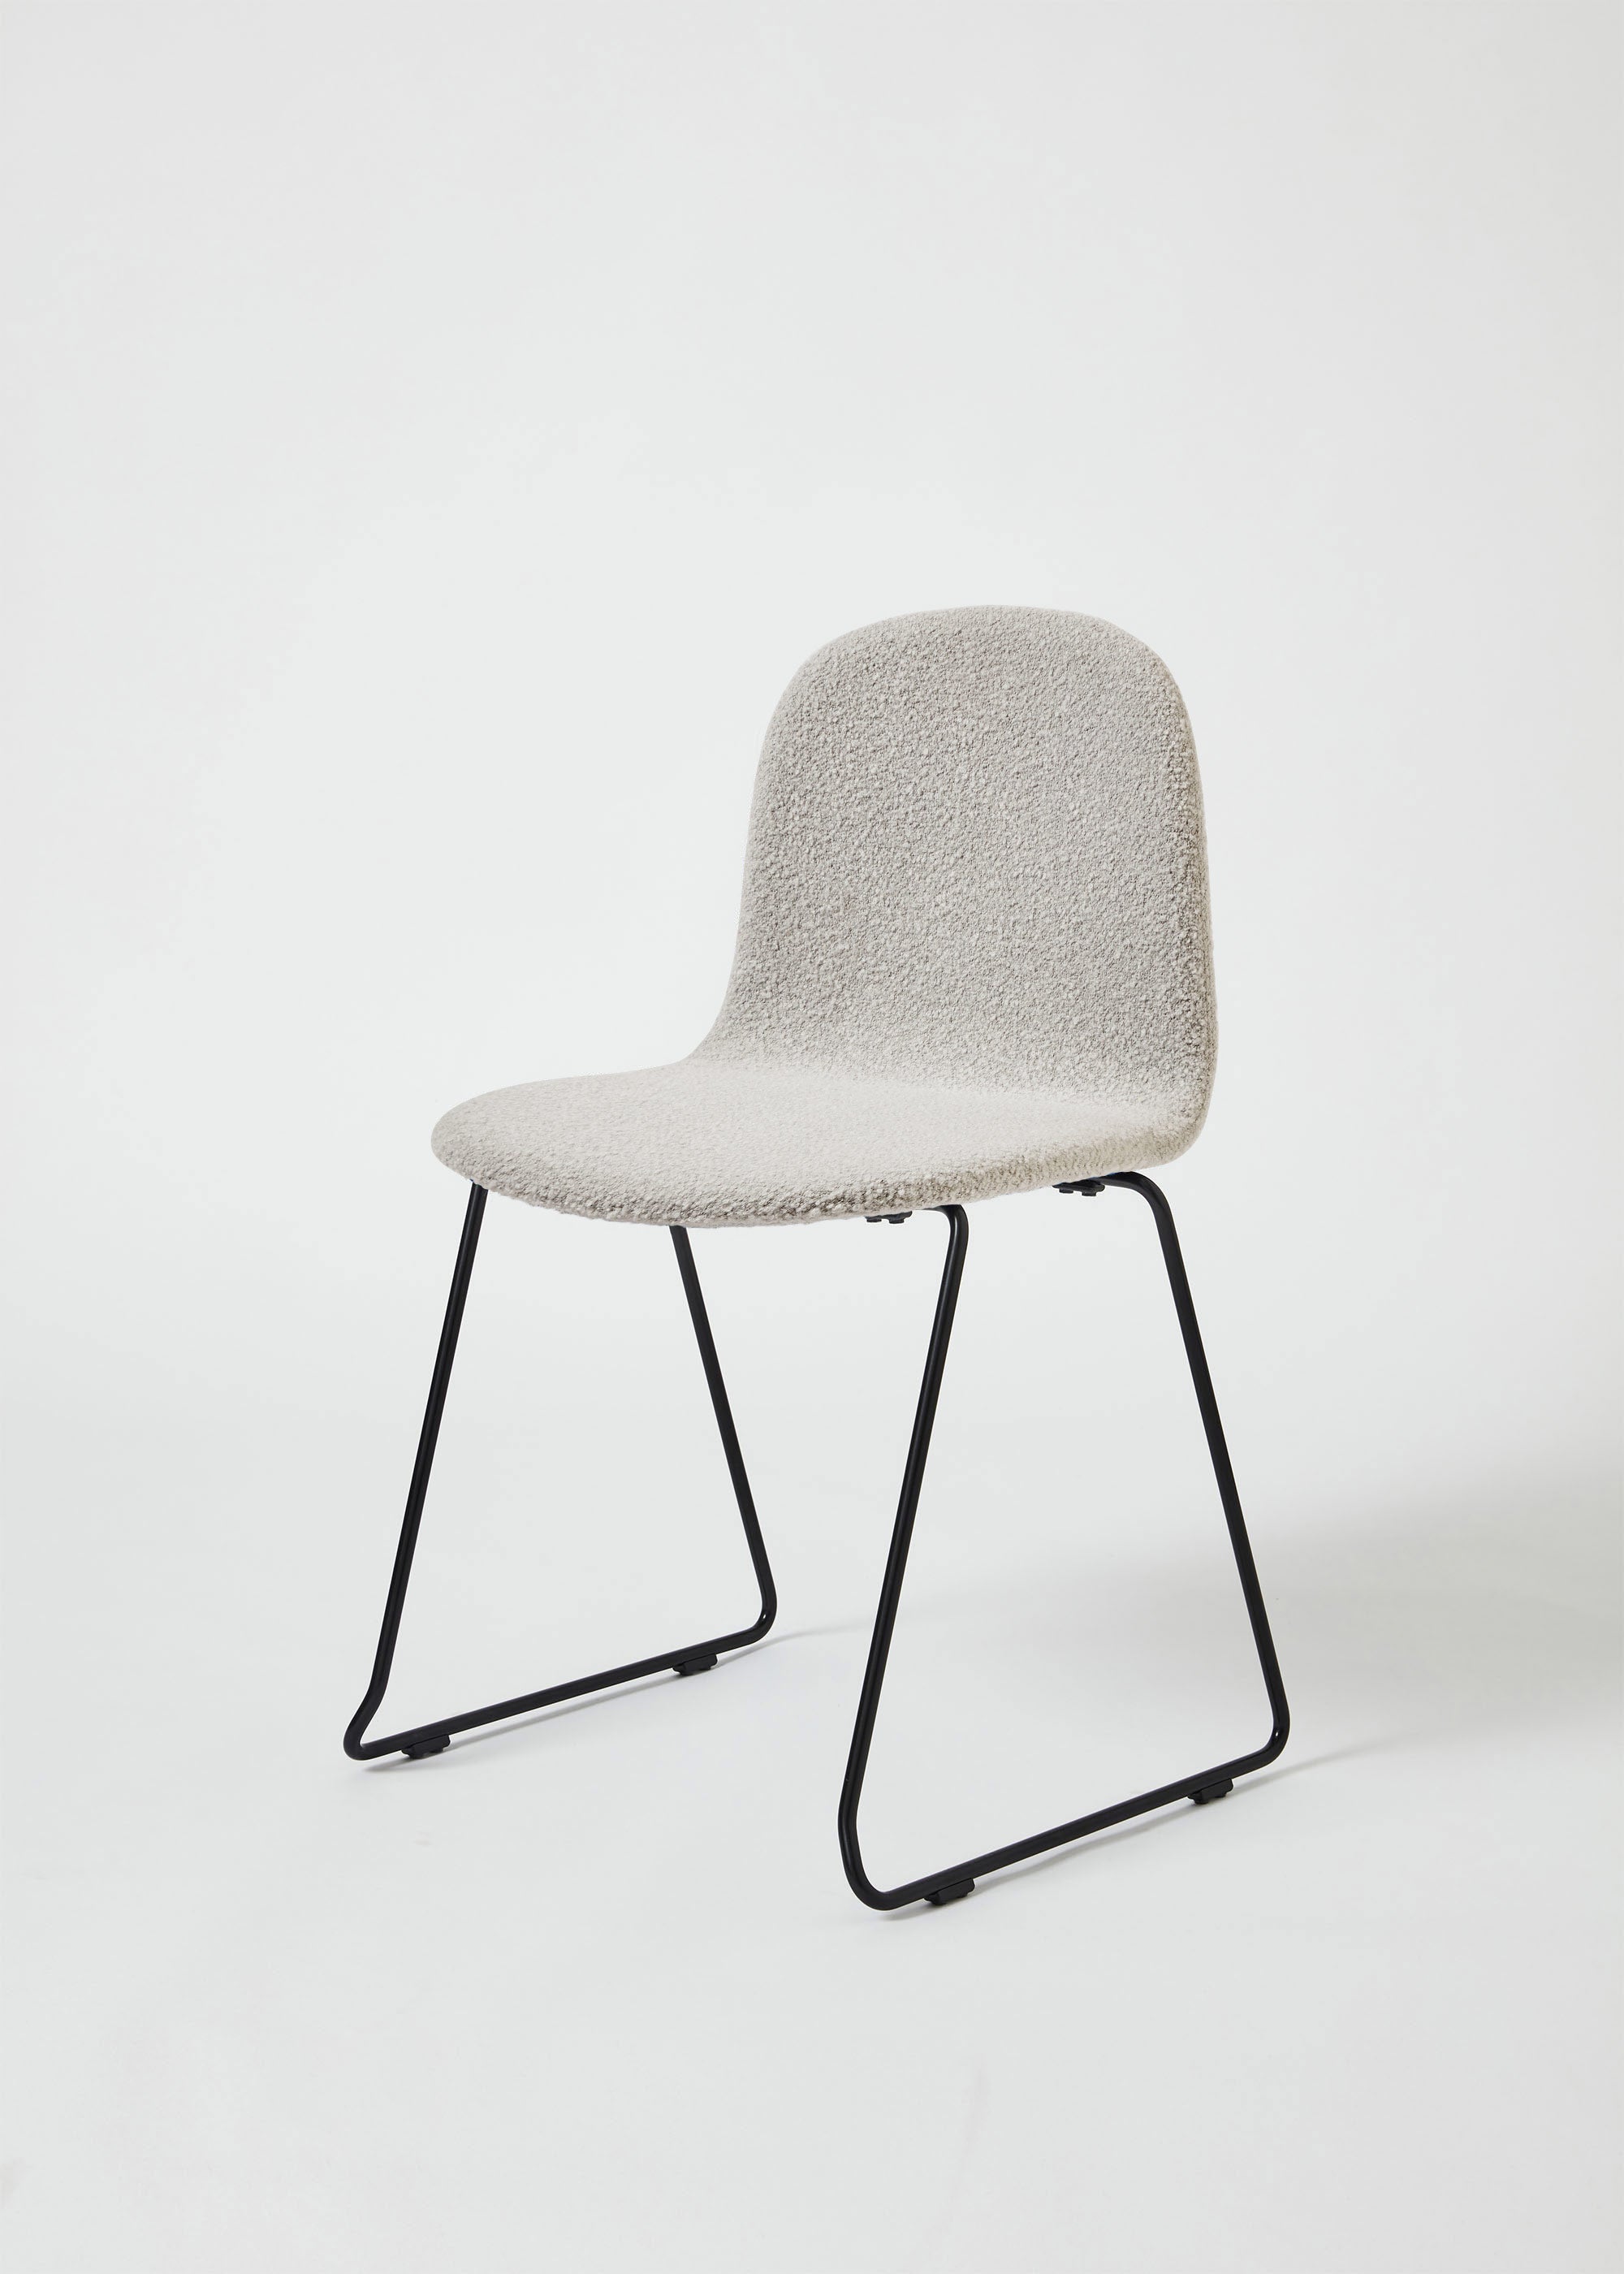 Potato Chair | Stacking Sled Timber & Upholstered Dining Office Chair with Handle | GibsonKarlo | DesignByThem ** HF7 Elle - 0230